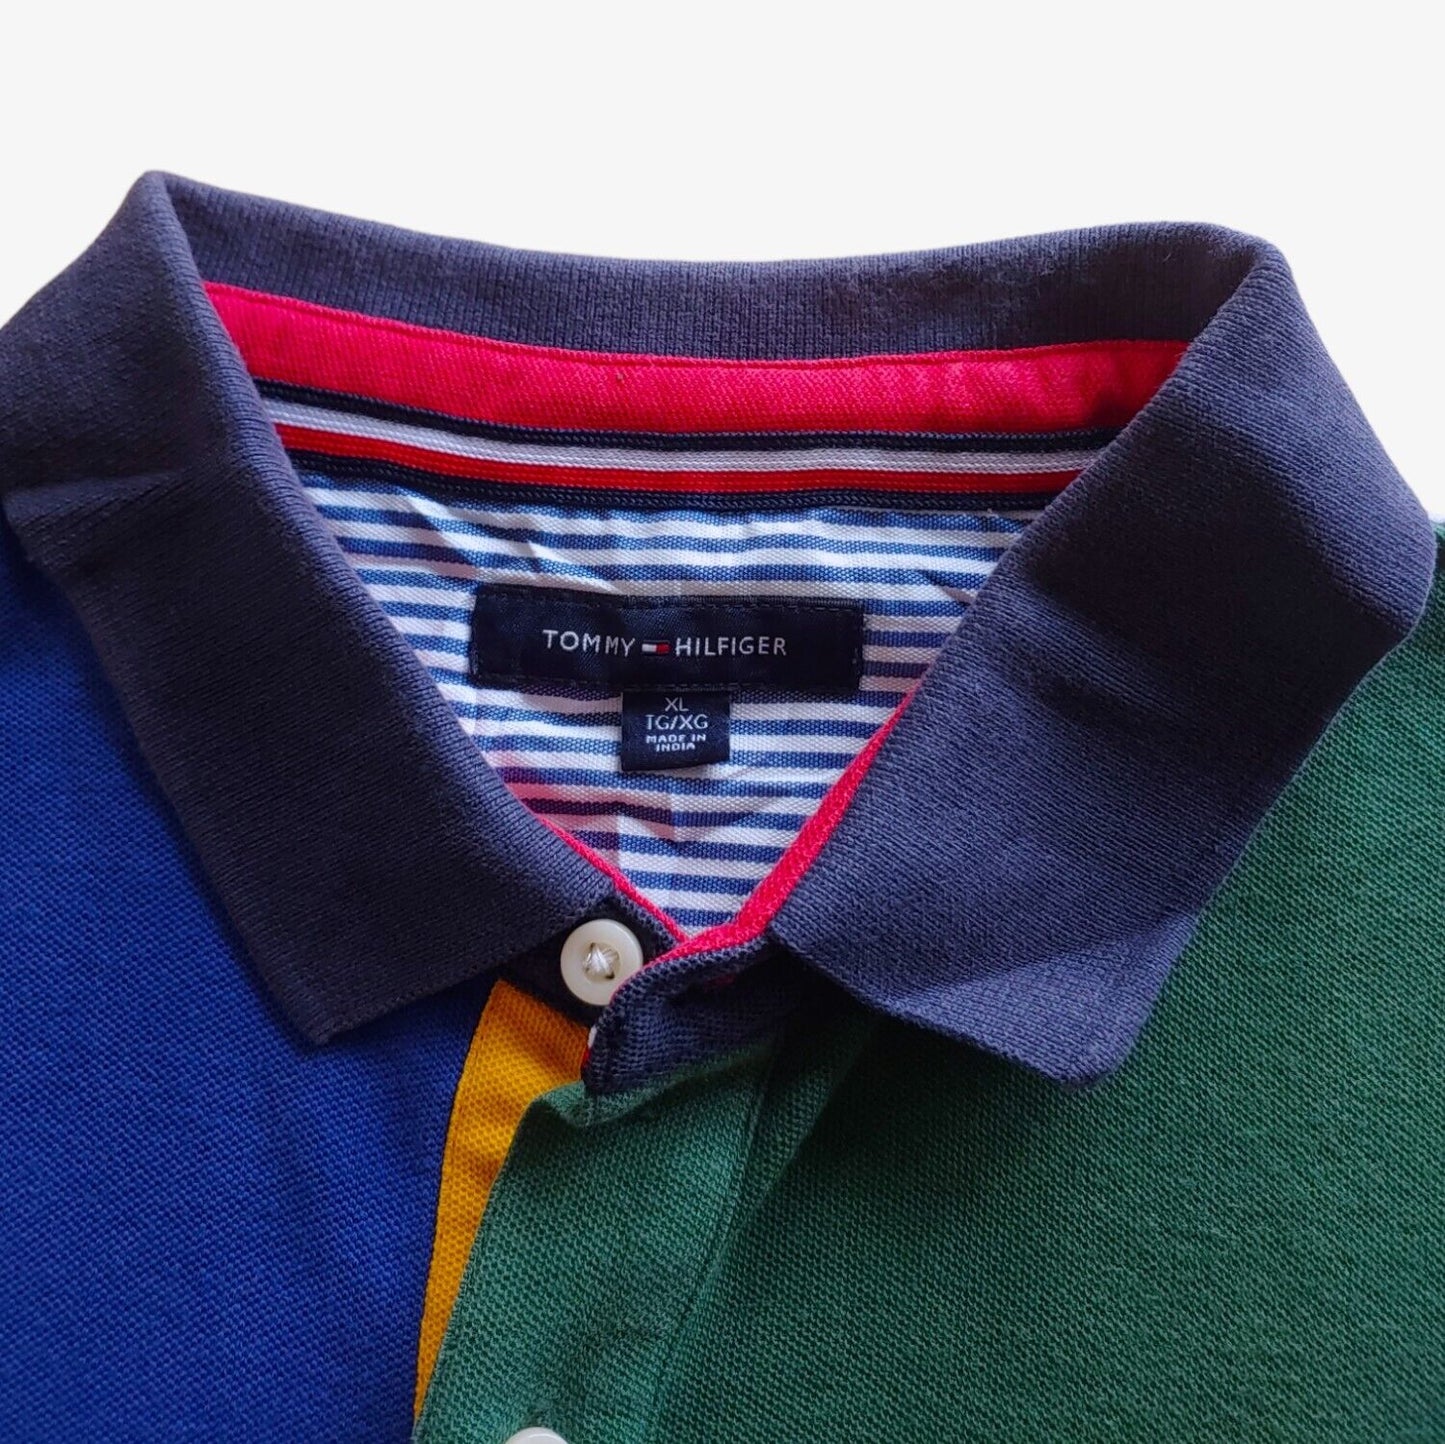 Vintage 1990s Tommy Hilfiger Colour Block Striped Polo With Chest Spell Out Logo Label - Casspios Dream